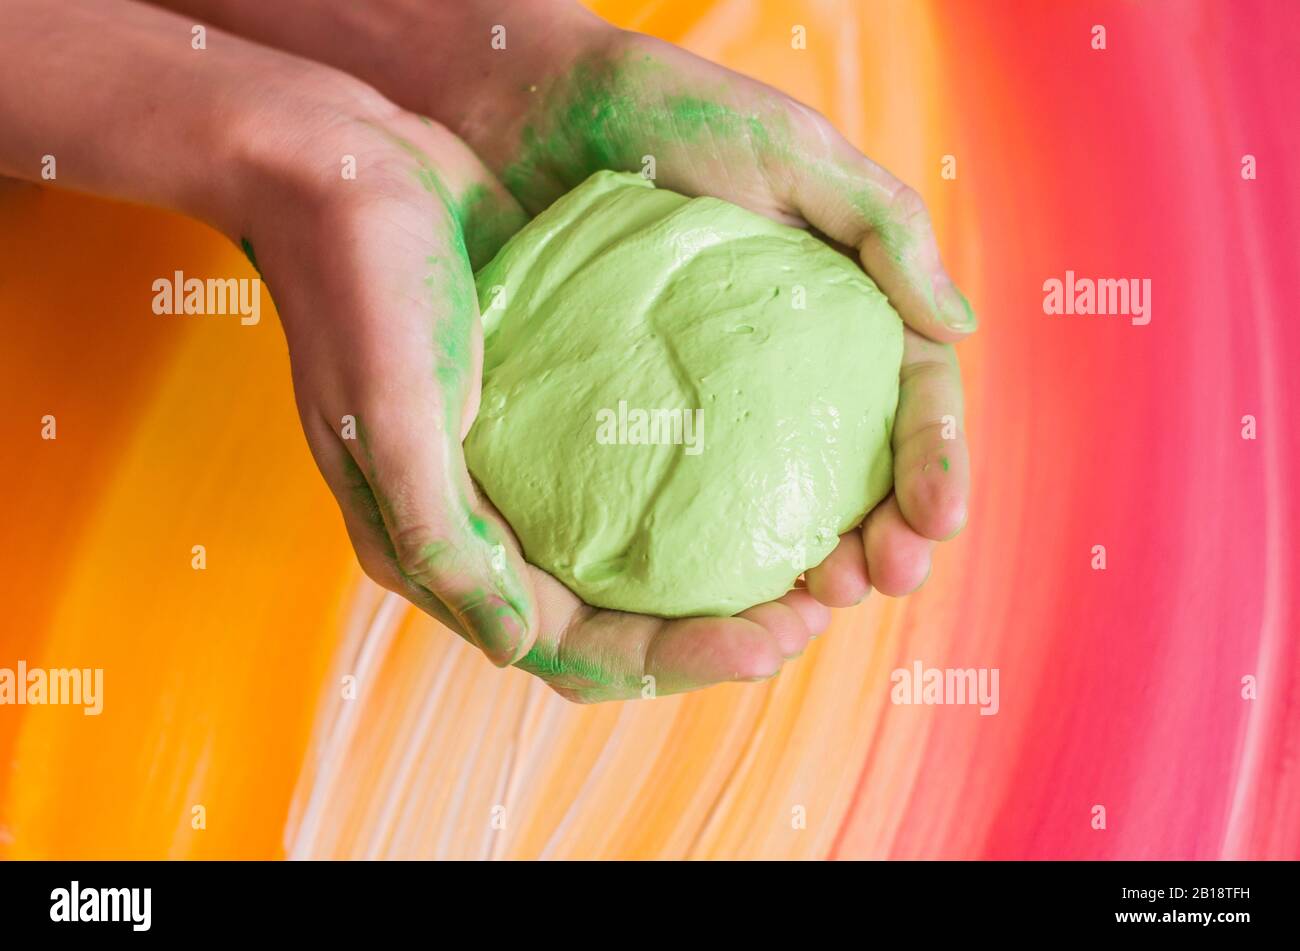 Light green slice in hands on a picturesque background. Toy for children photo. Stock Photo